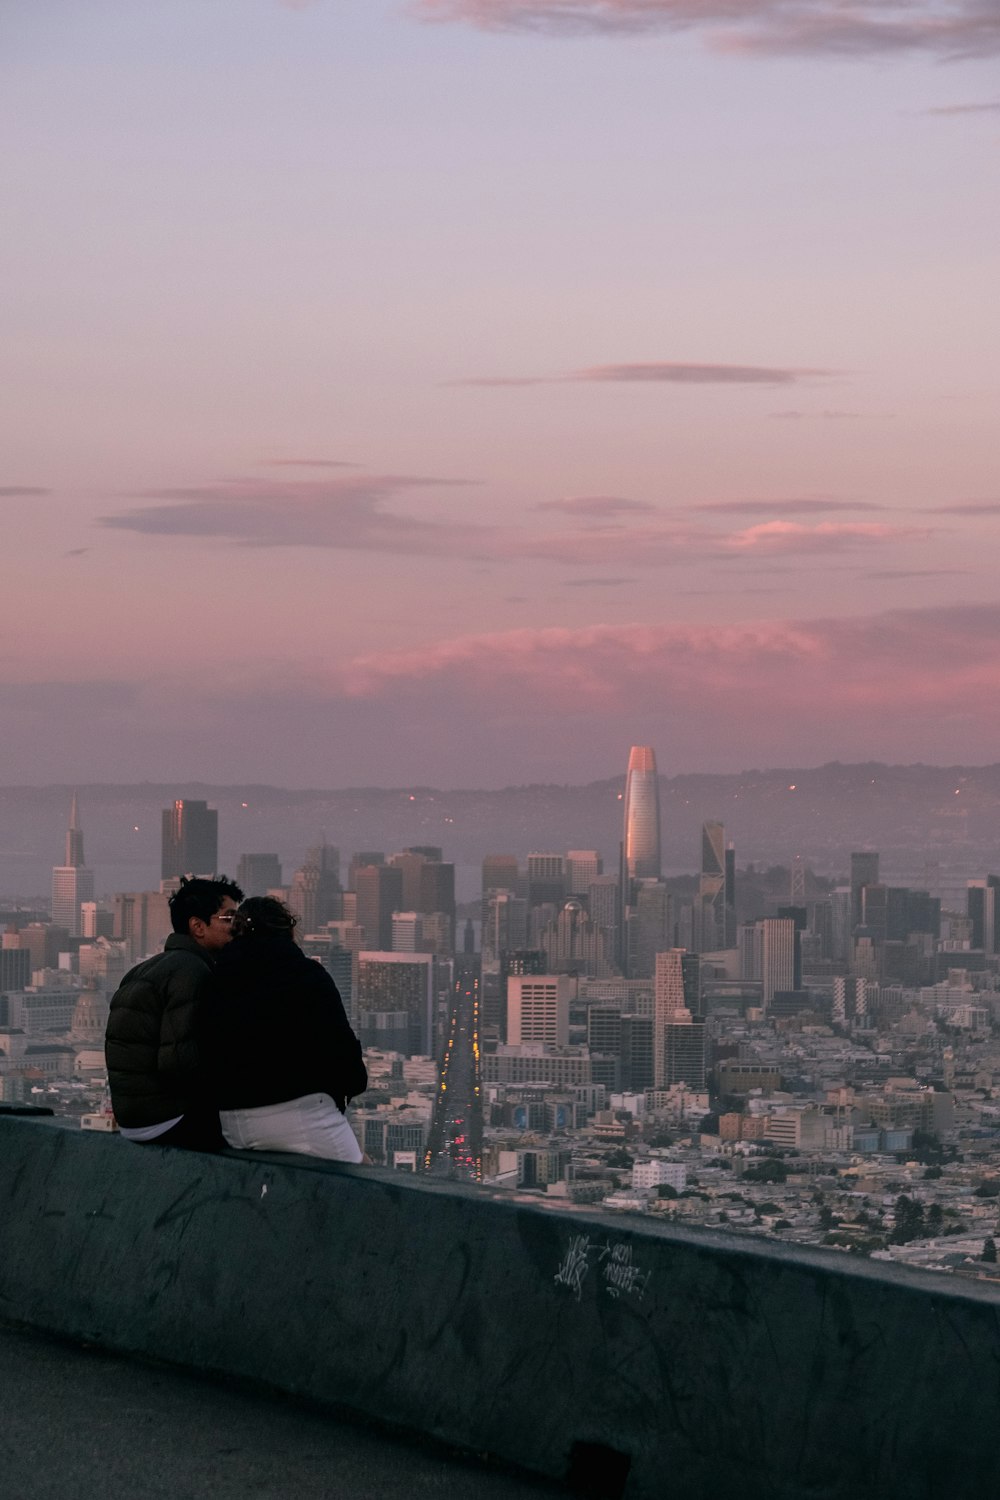 two people sitting on a ledge overlooking a city